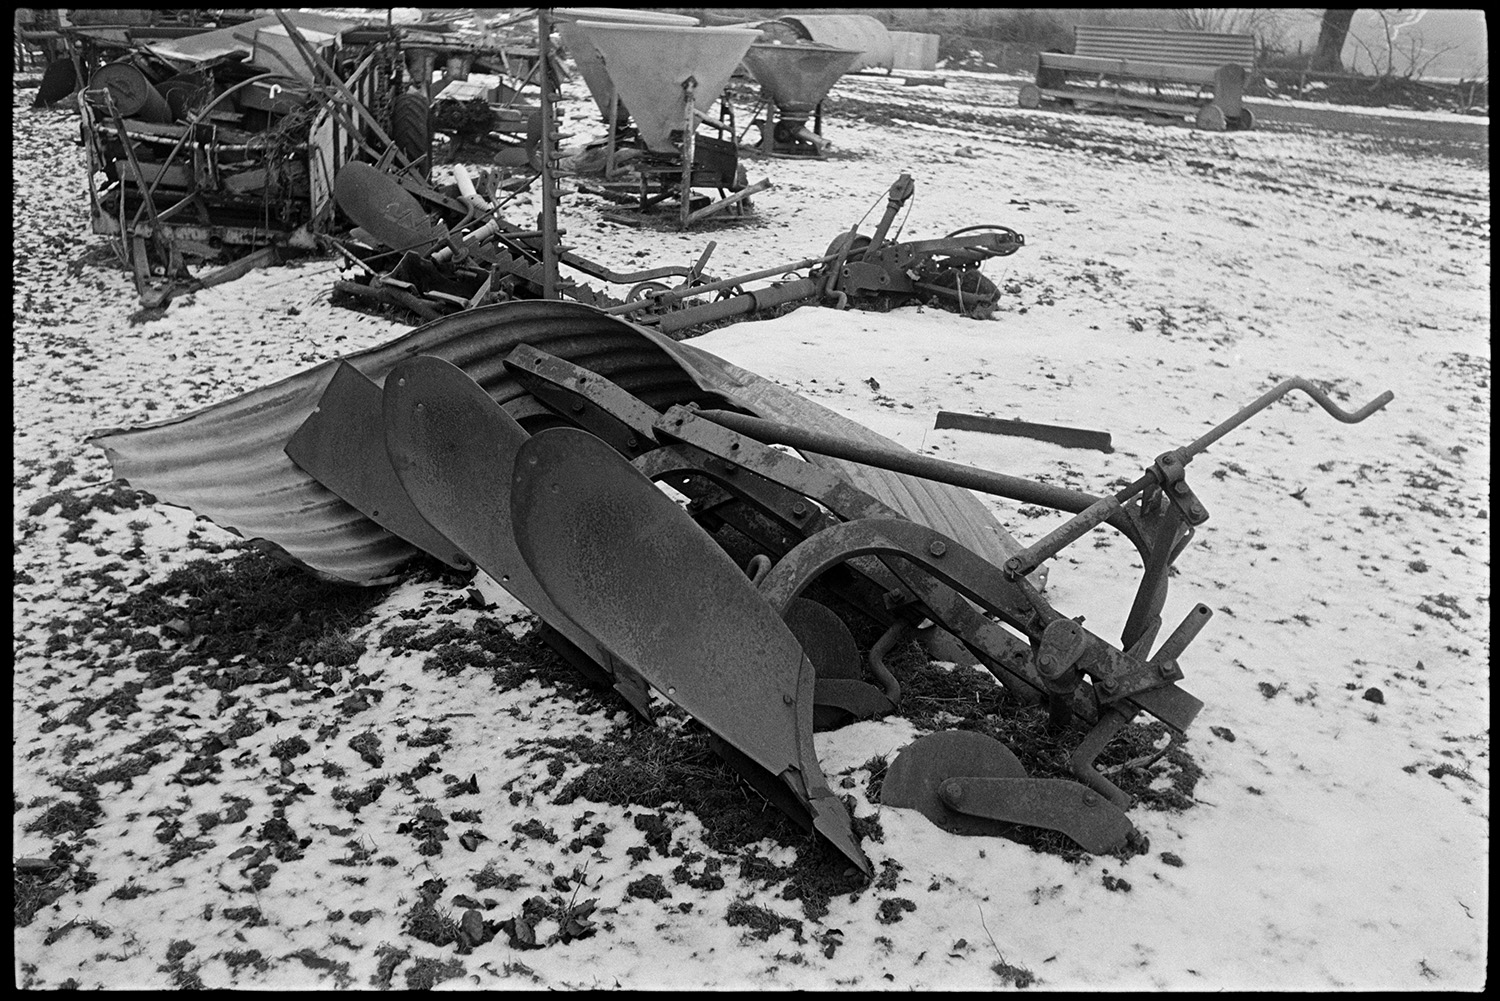 Snow, old rusting implements lying in field, plough, circular saw, reap and binder.
[Old plough, corrugated iron, hay feeders and other disused farm equipment piled in a field lightly covered with snow at Ashwell Farm, Dolton.]